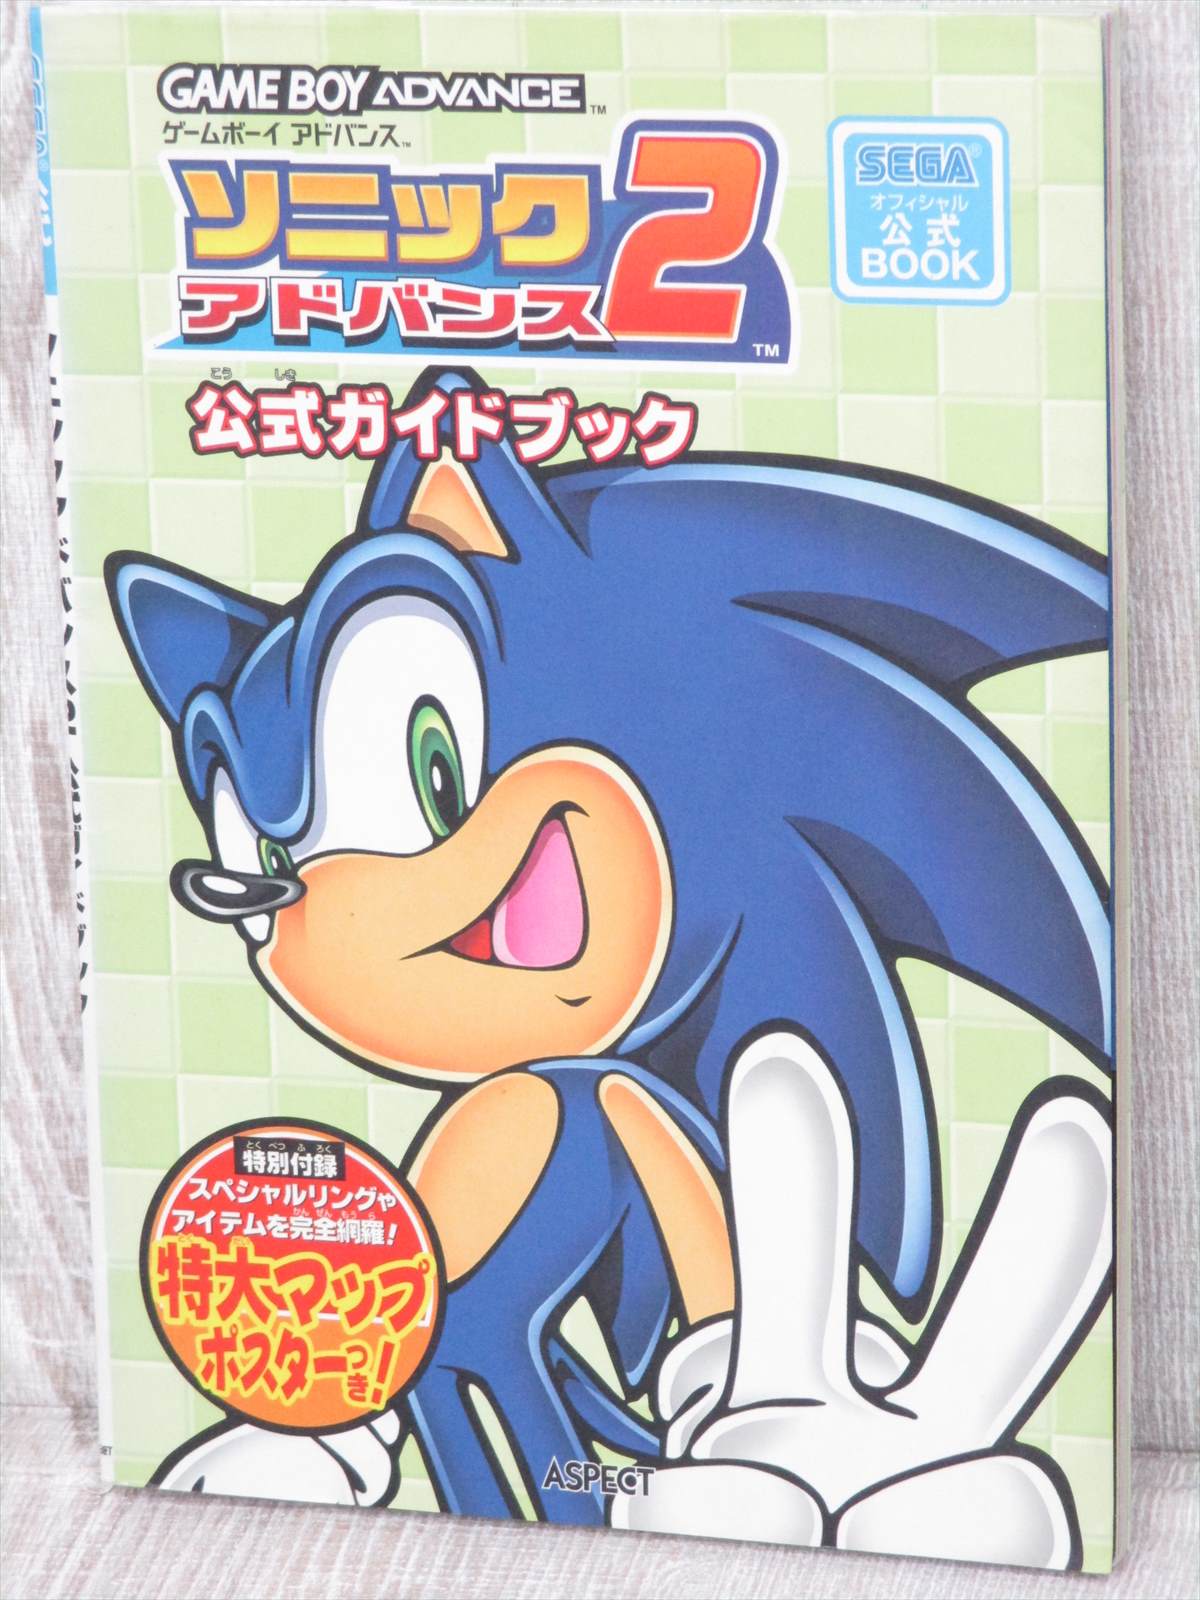 Sonic Advance 2 Official Guide 02 Gba Book Ap87 Ebay